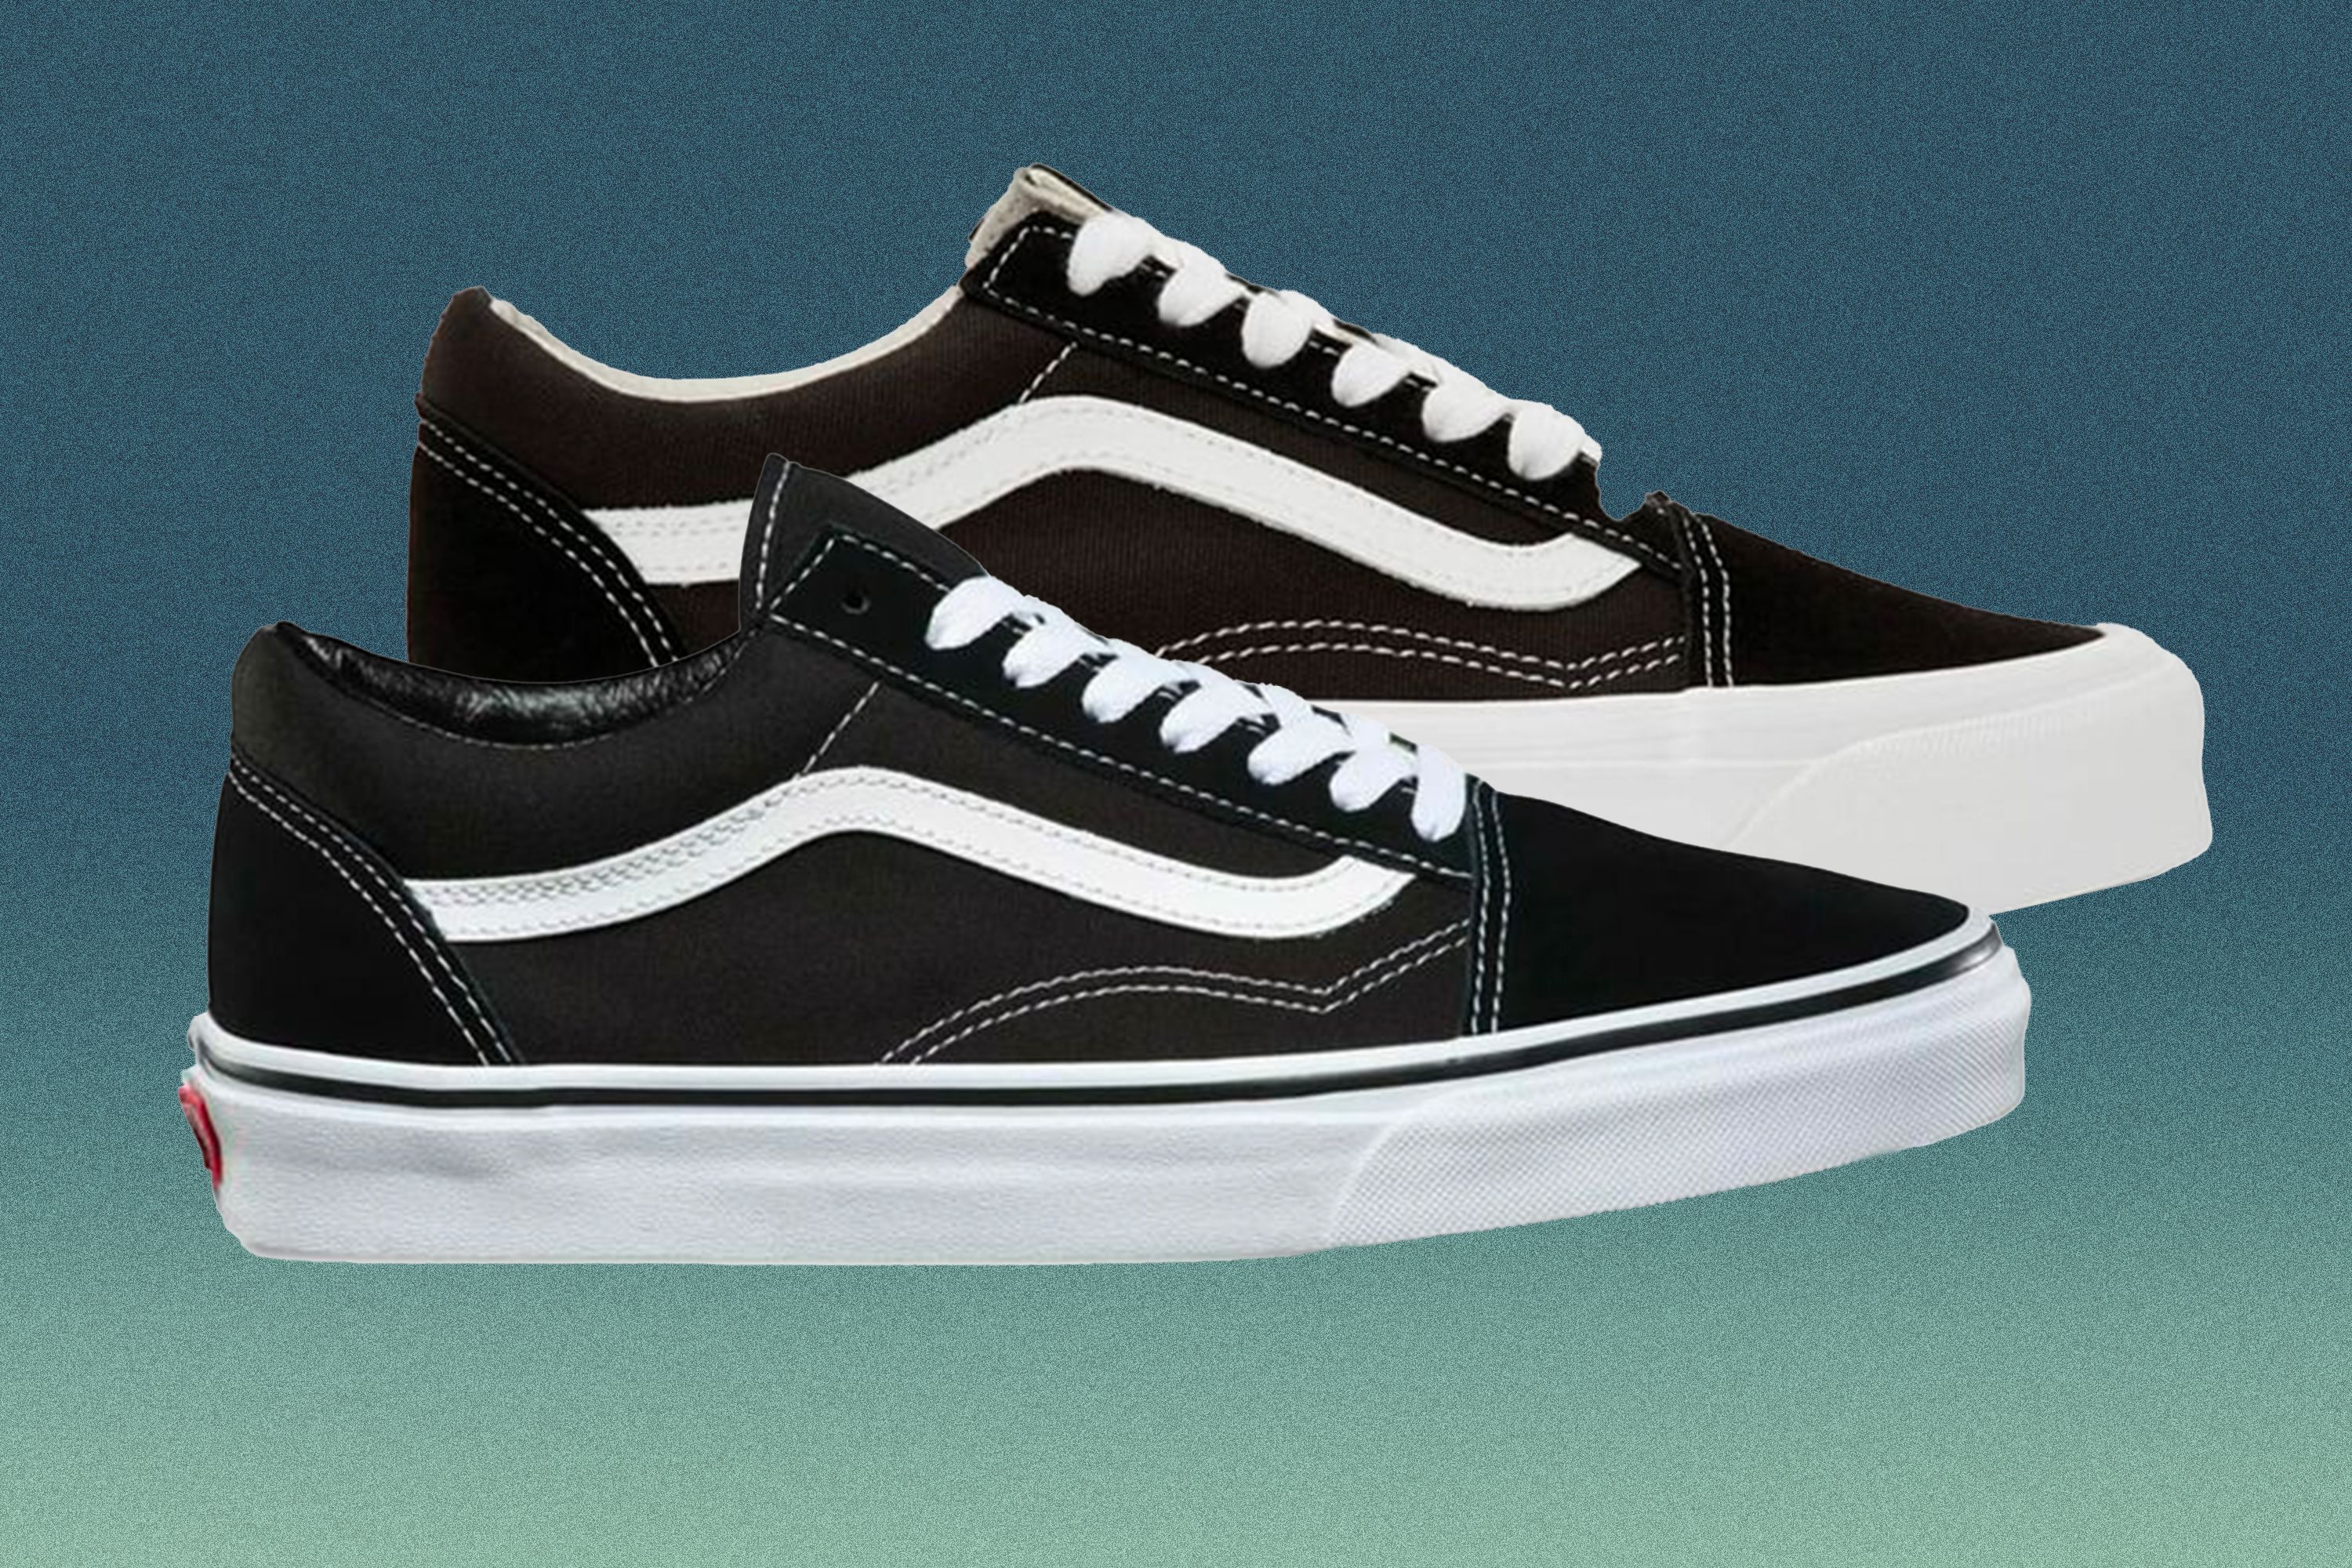 Why Are Vault By Vans Sneakers More Expensive Than Vans Classics?